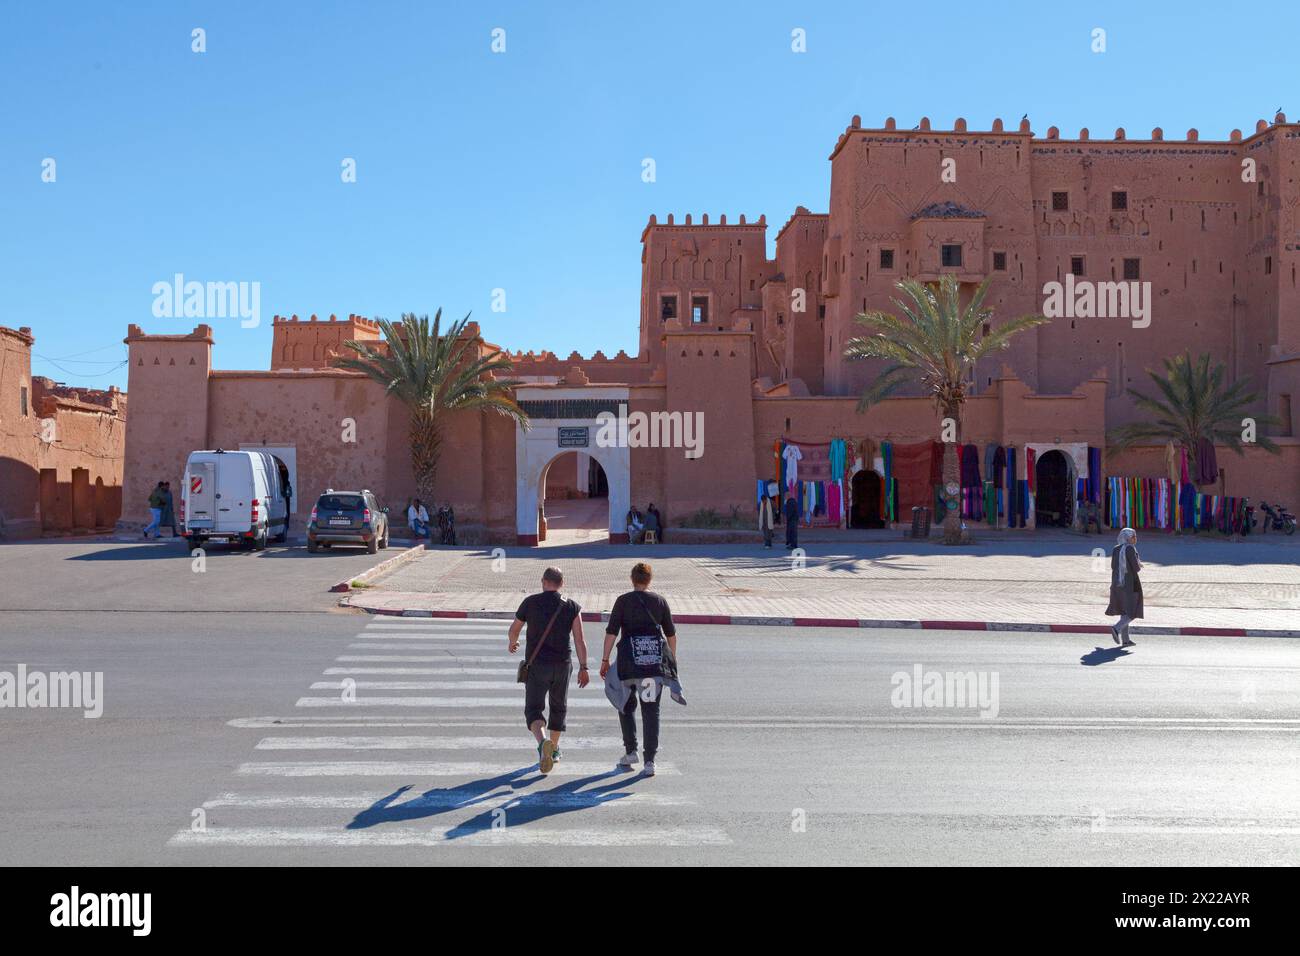 Ouarzazate, Morocco - January 30 2019: The Kasbah Taourirt was built in the 17th century by the Glaoui tribe. It was one of the first big Berber archi Stock Photo